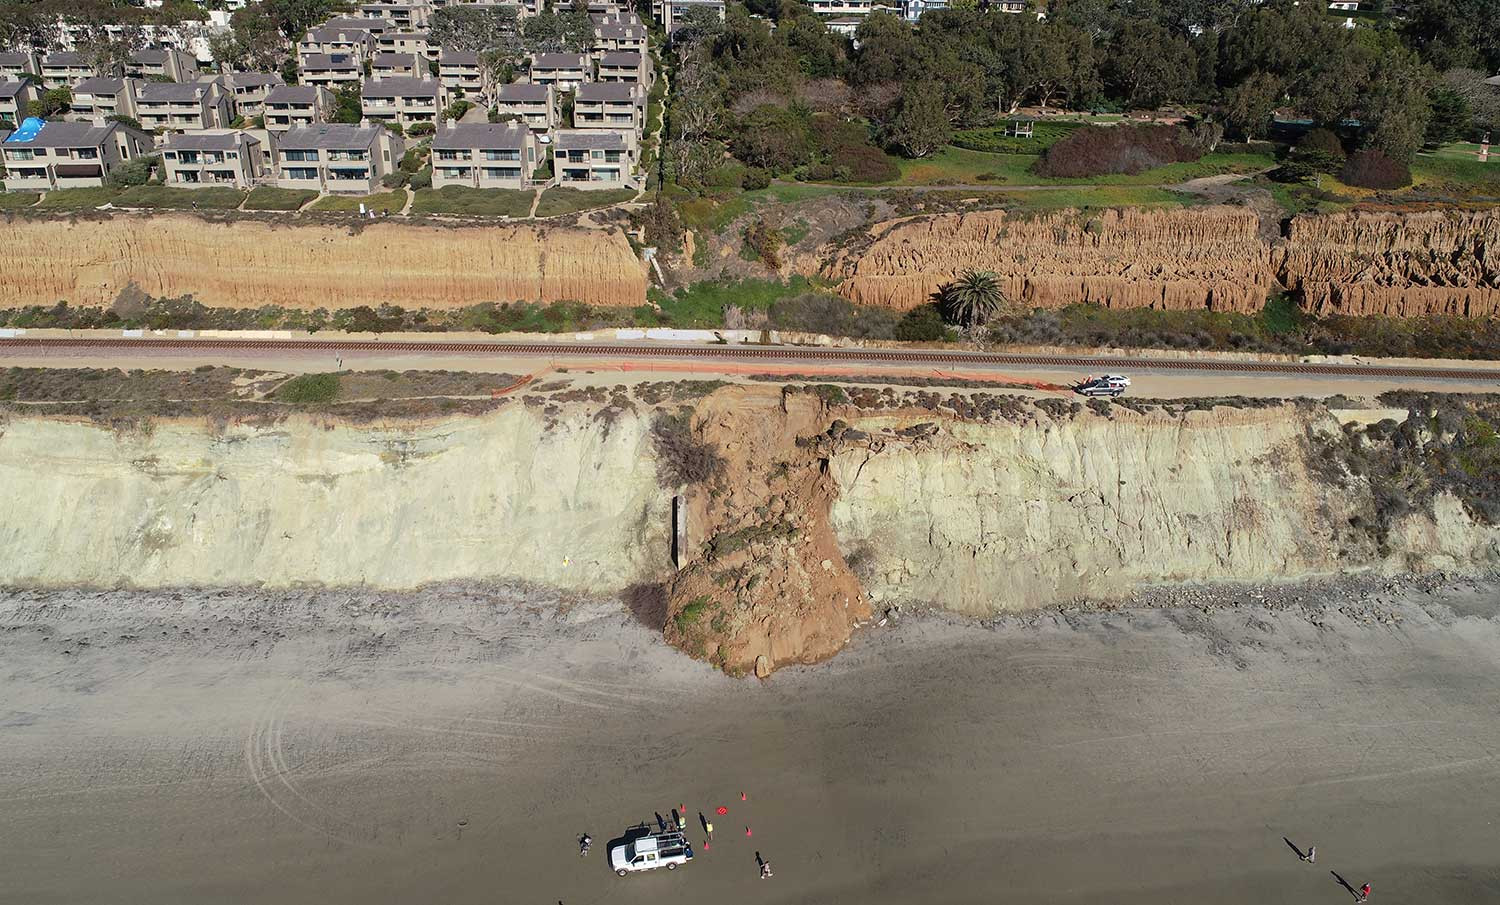 The Scripps Coastal Processes Group conducts a LiDAR survey in Del Mar following a cliff collapse next to the rail corridor in February 2021. Photo credit: Coastal Process Group at Scripps Institution of Oceanography.